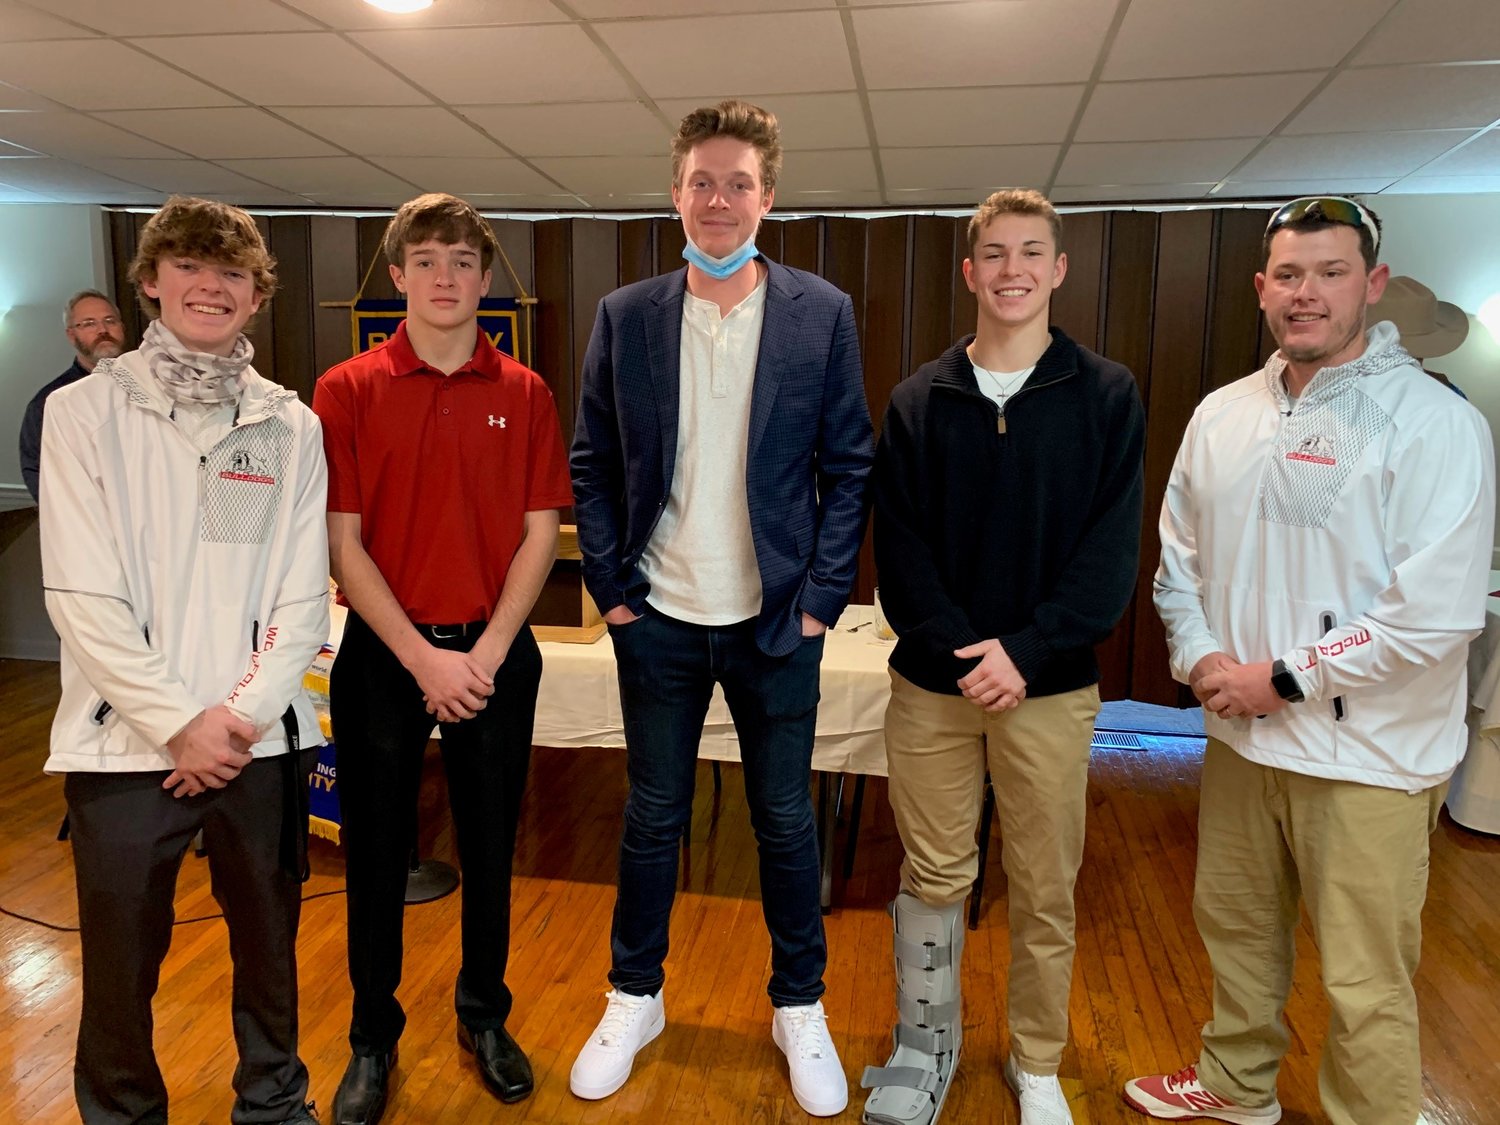 The Mexico High School baseball squad was represented by seniors Hunter Woolfolk, Jesse Fennewald, Ty Prince and coach Daniel McCarty. The Rotary Club invited local baseball players to the event. [Dave Faries]